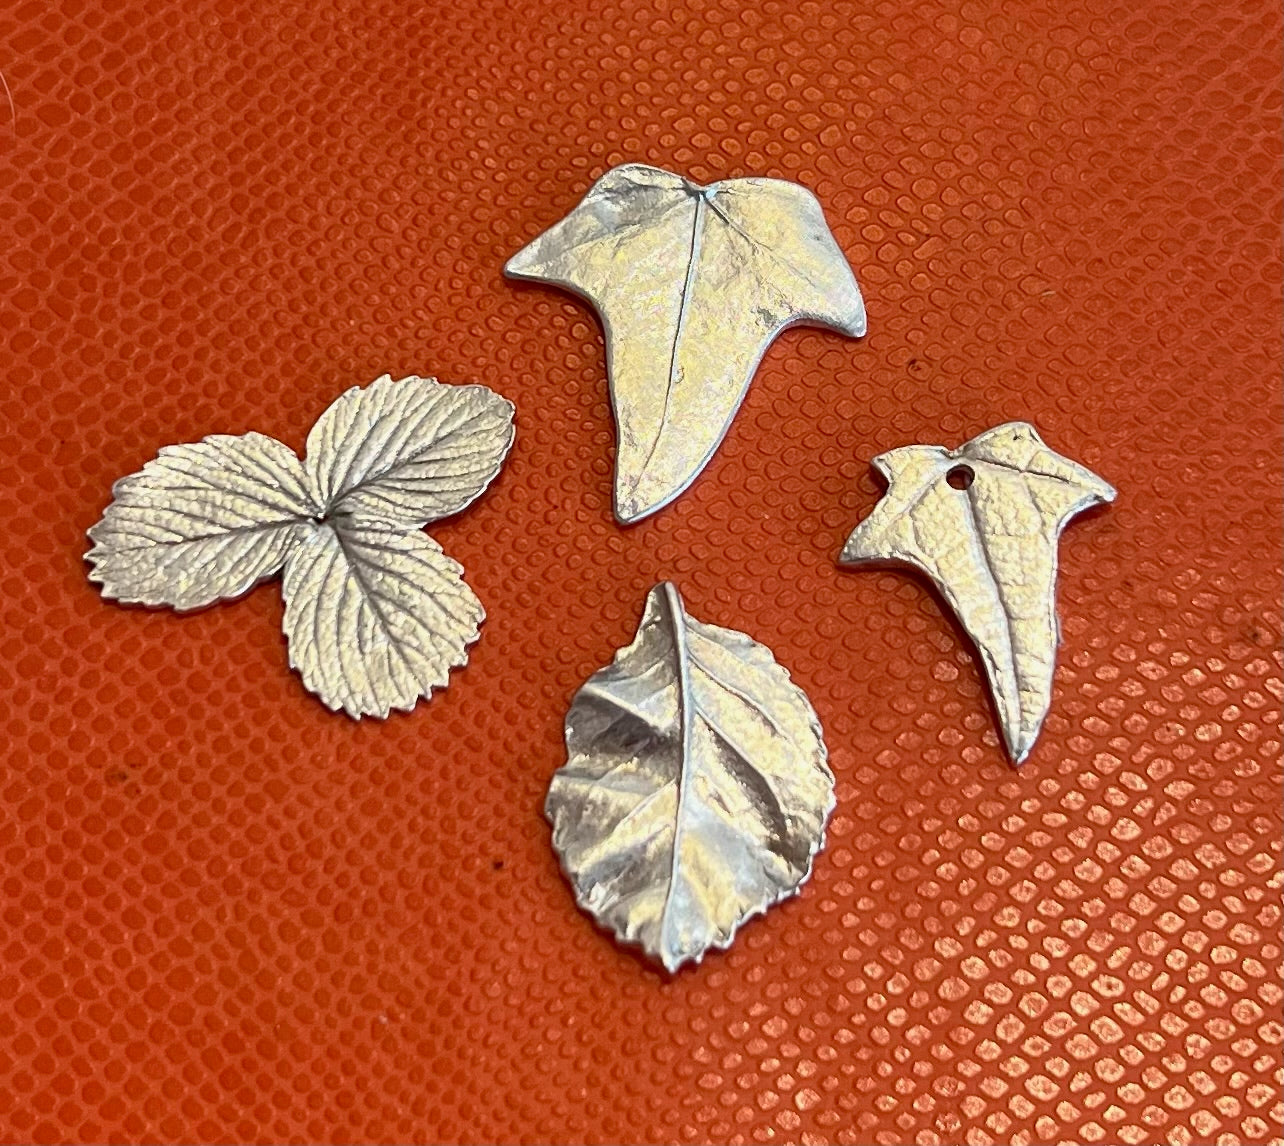 Silver Leaf Jewellery making course